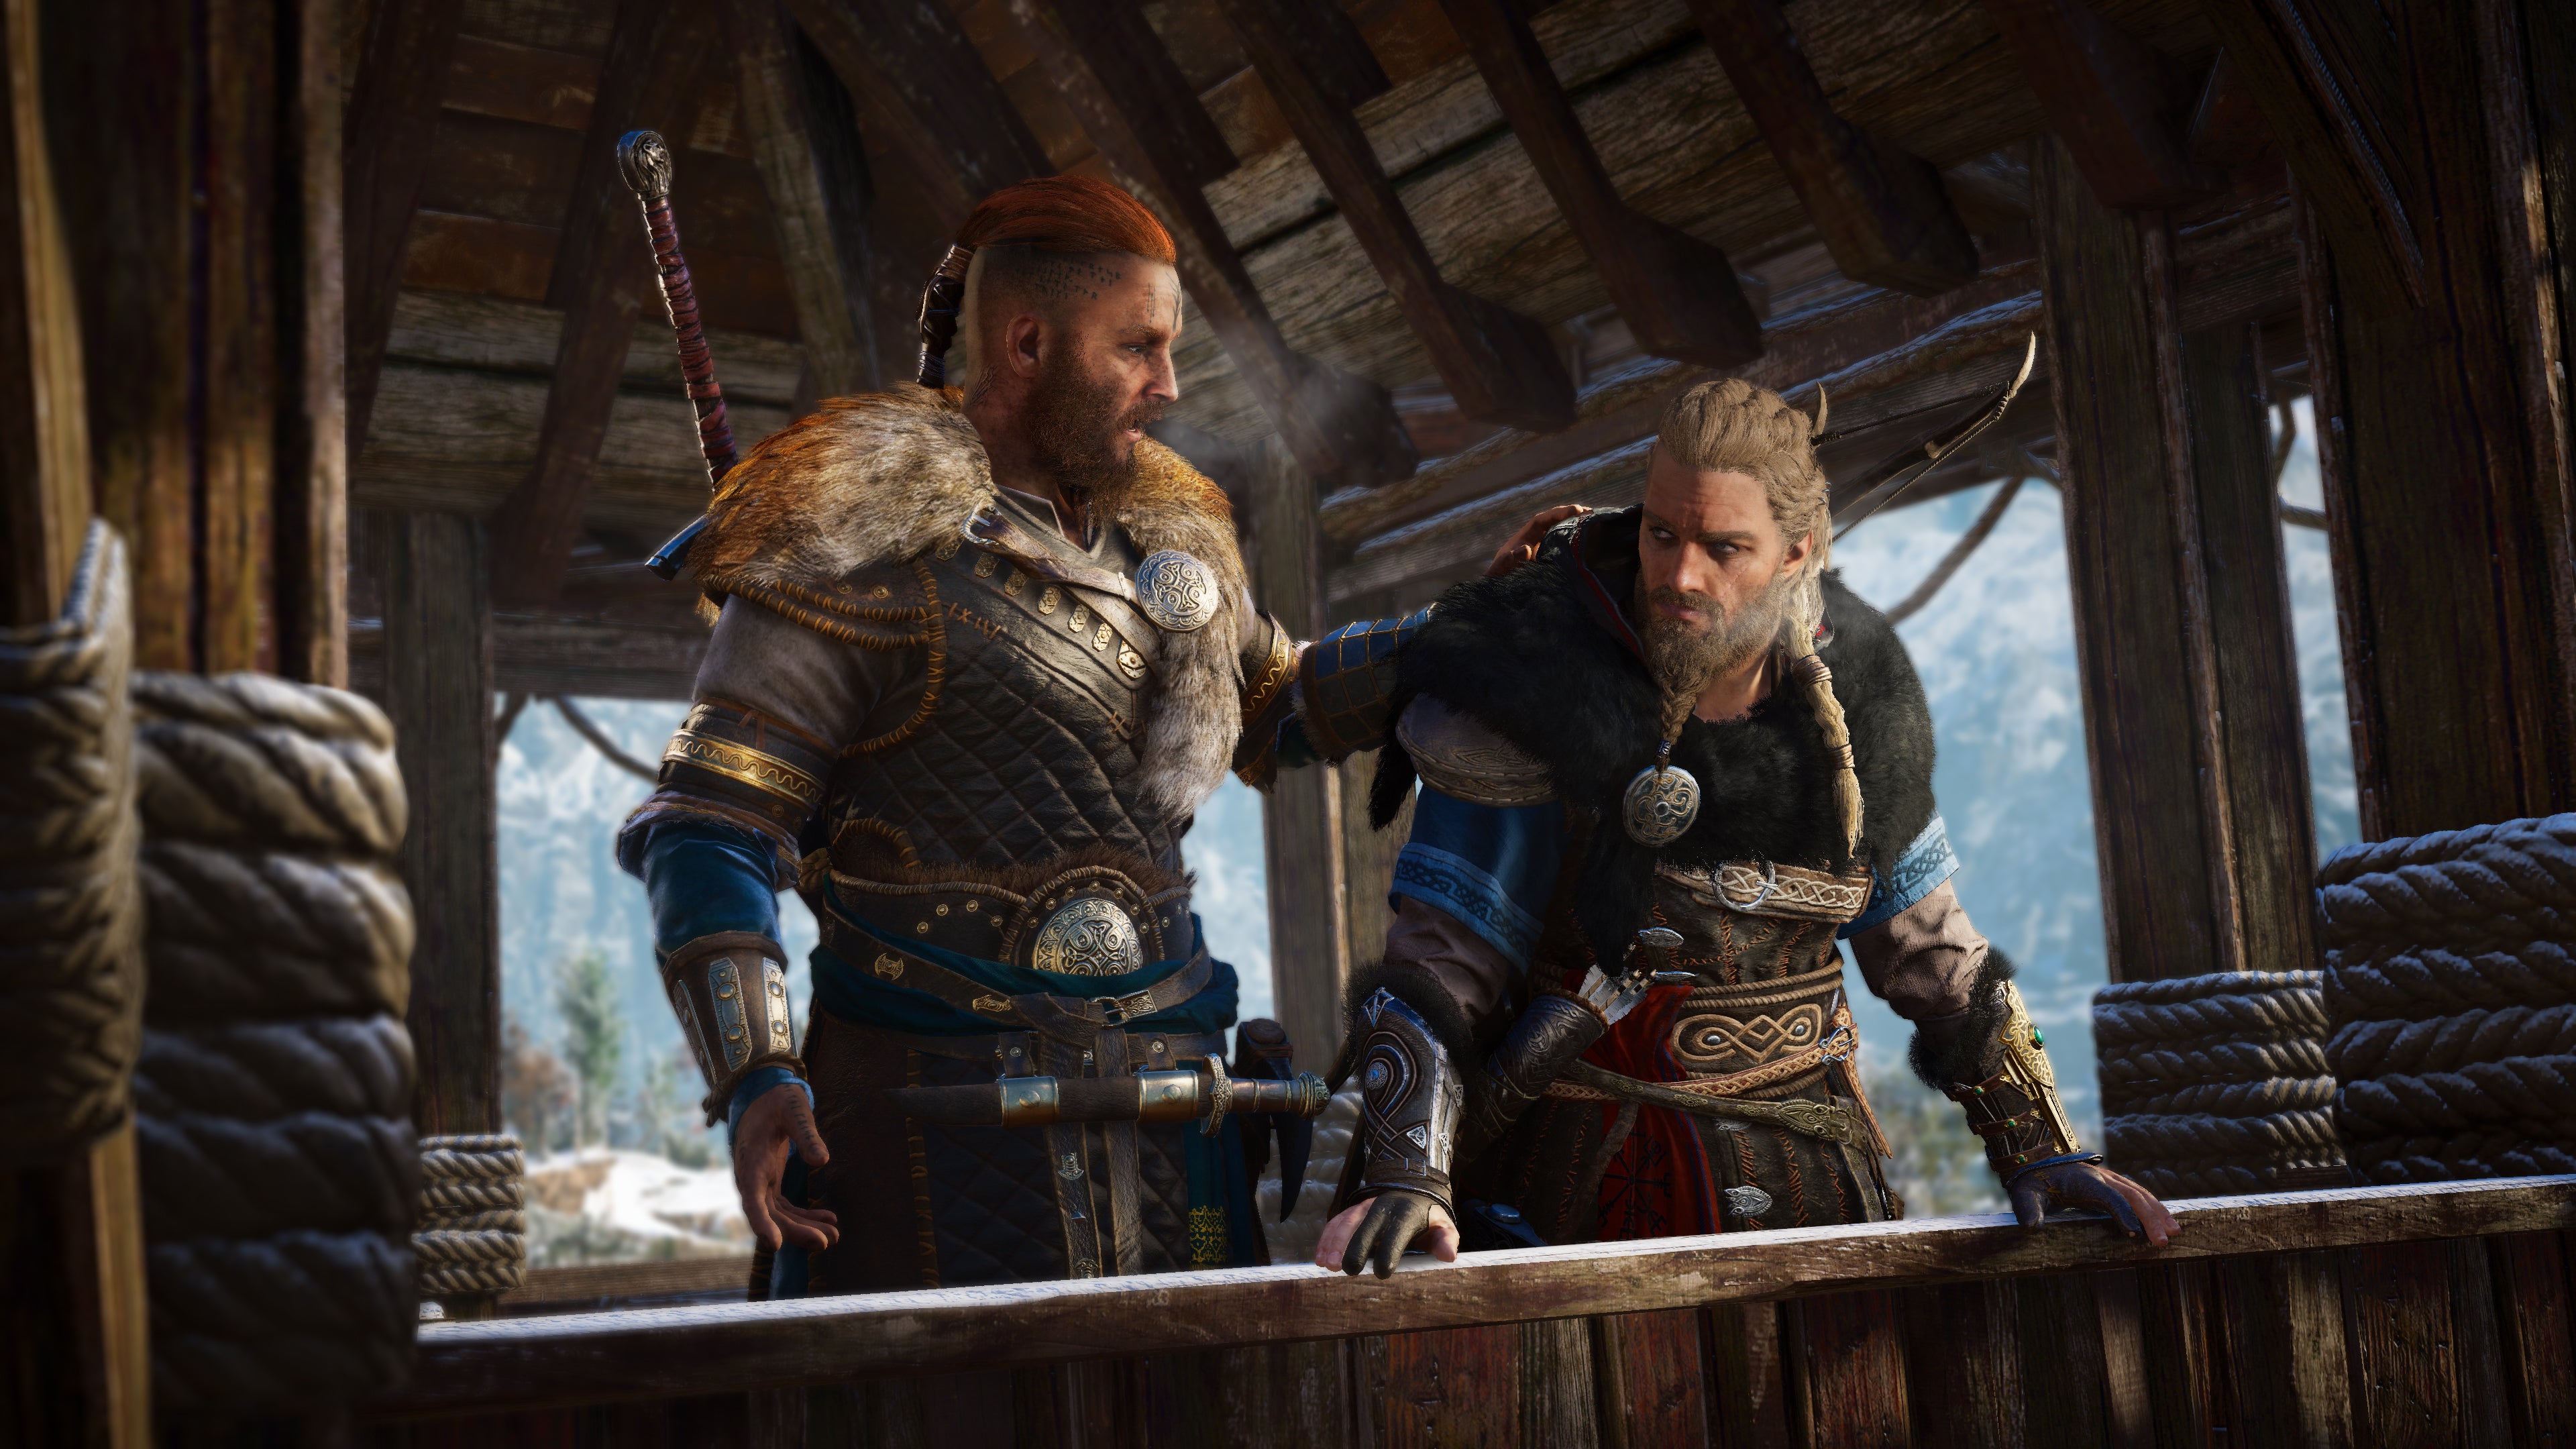 Image for Take a look at Viking rap battles and raid gameplay in Assassin’s Creed Valhalla